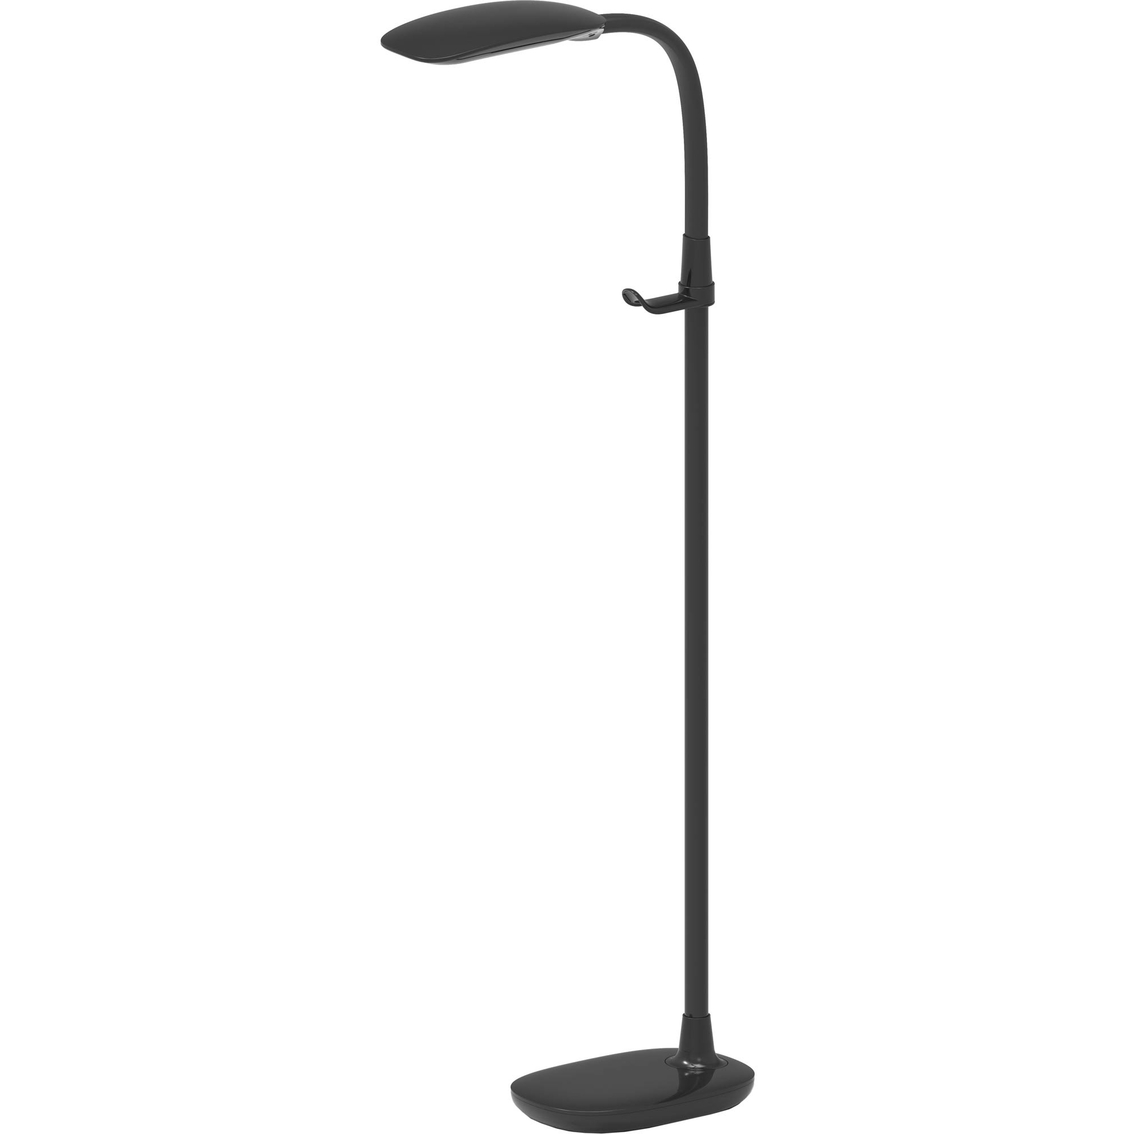 Artiva USA PRO-Vision 62 in. Full Spectrum LED Floor Lamp with Accessory Hangers - Image 1 of 4